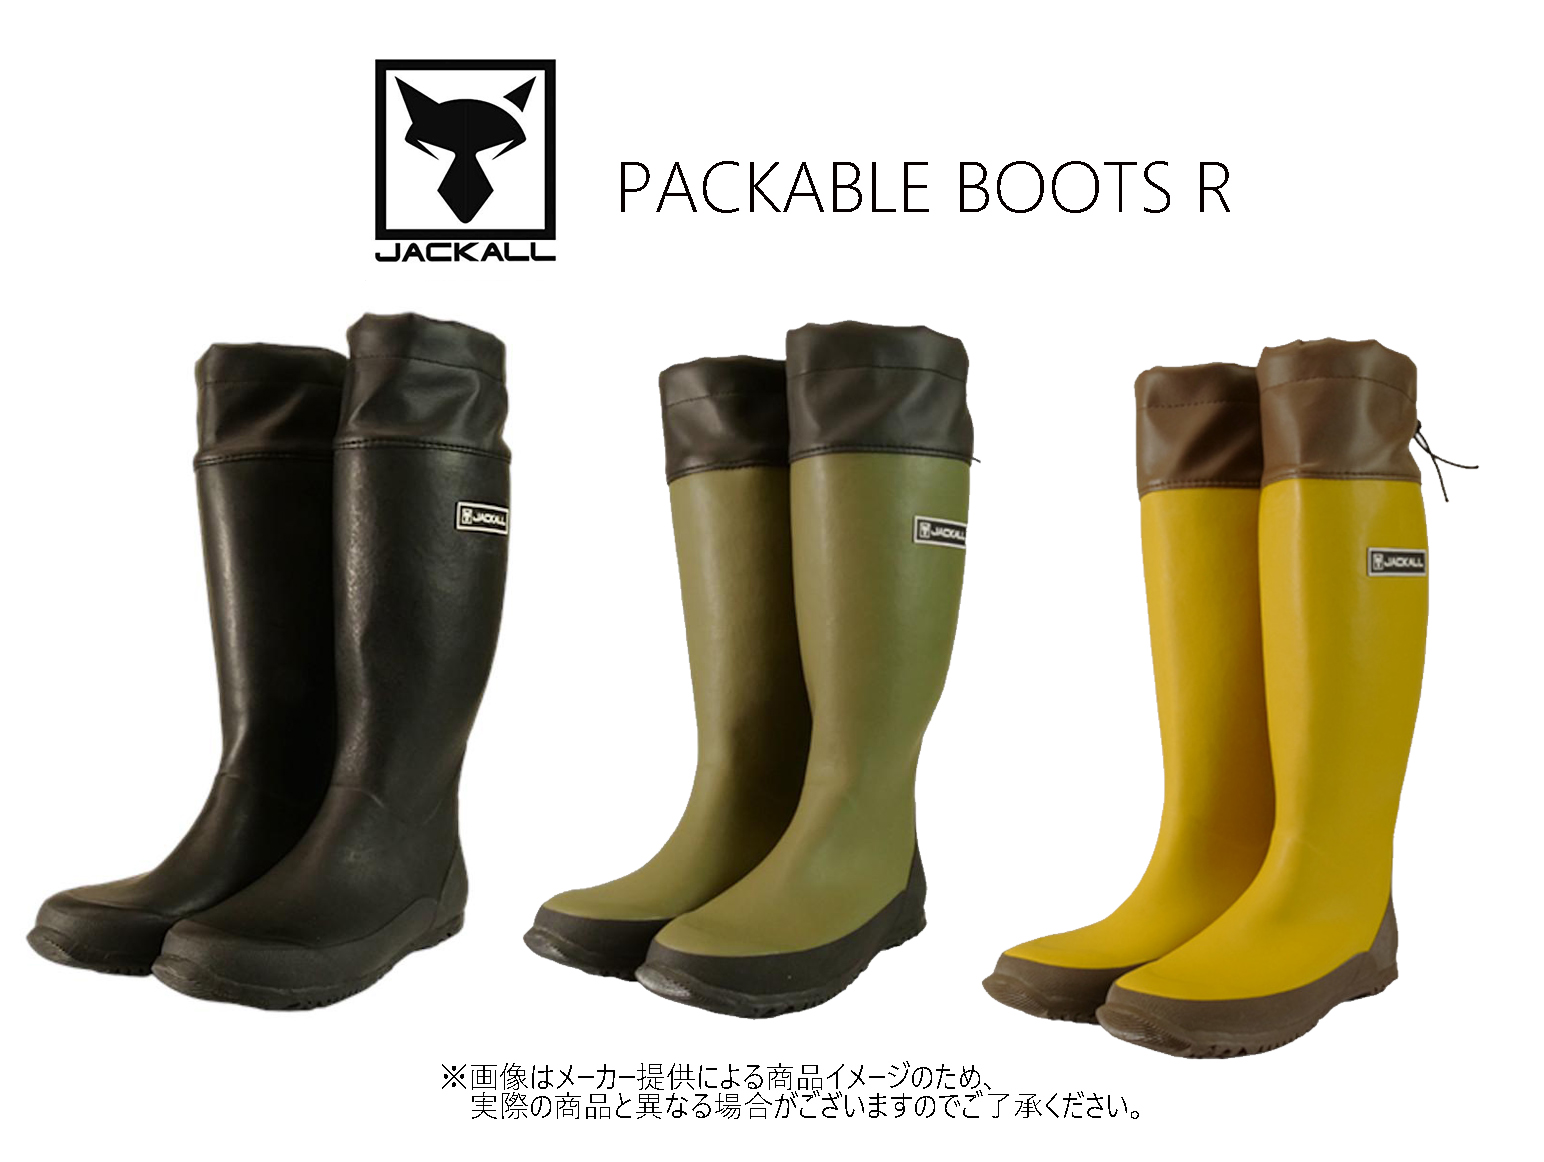 JACKALL( Jackal ) PACKABLE BOOTS R(pa Cub ru boots R) ( fishing boots * rain boots * fishing supplies * outdoor * boots * storage sack attaching * compact storage ) -